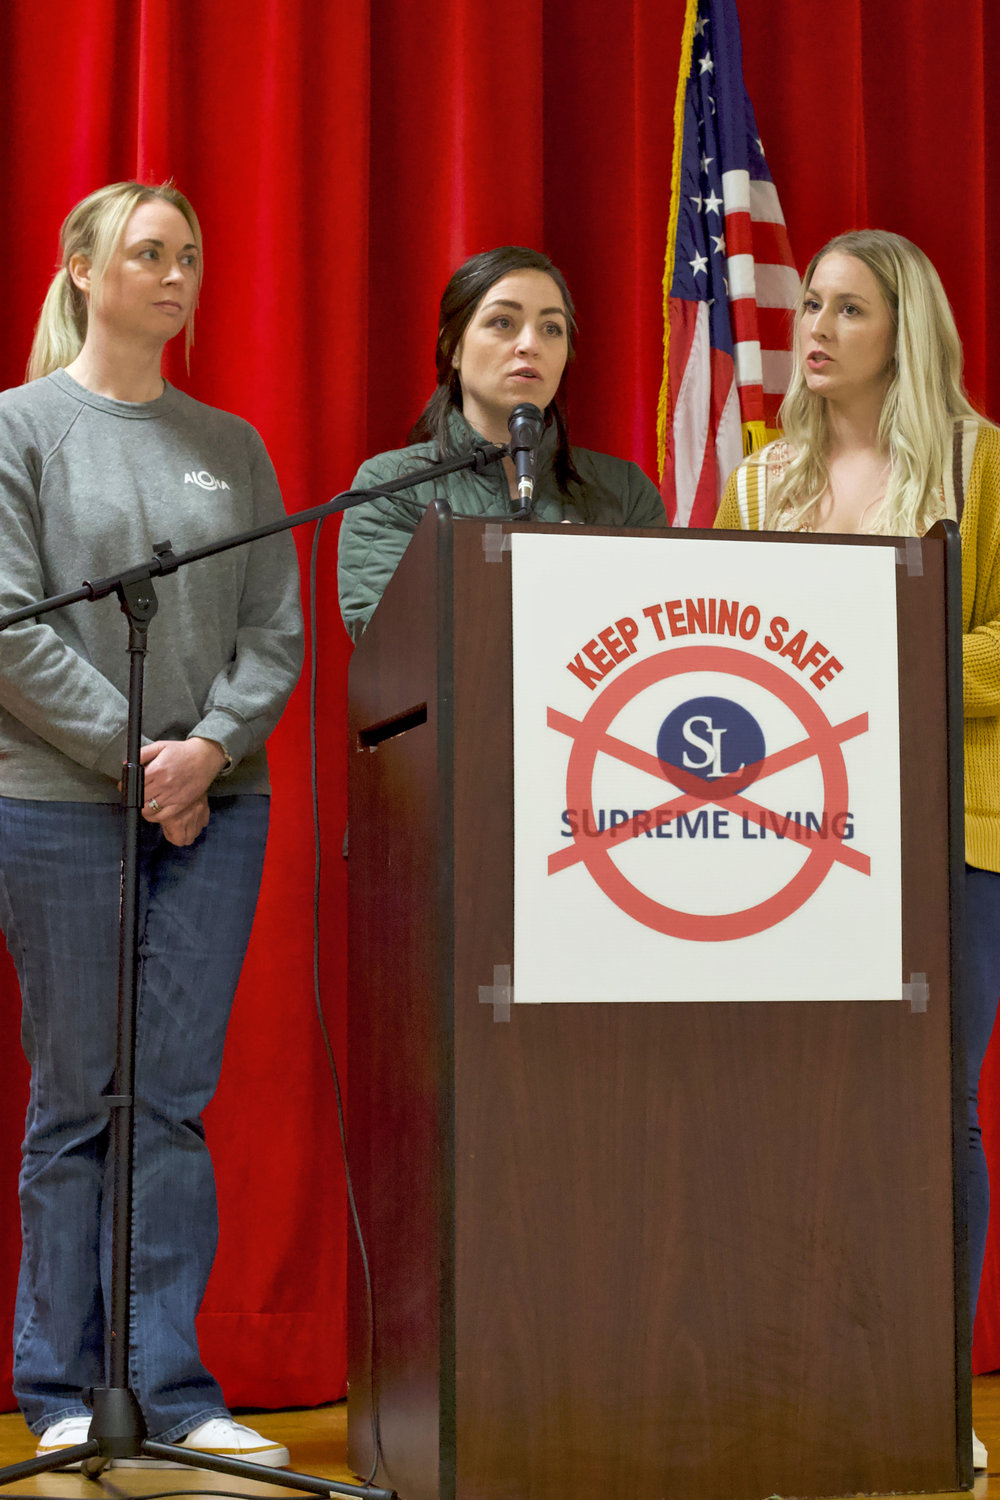 From left, Tenino-area residents Sarah Fox, Kerri Jeter and Kendall Tutlle speak during a community meeting at Tenino High School on Sunday where residents gathered to discuss plans to oppose a Supreme Living-run Less Restrictive Alternative facility for sex offenders.